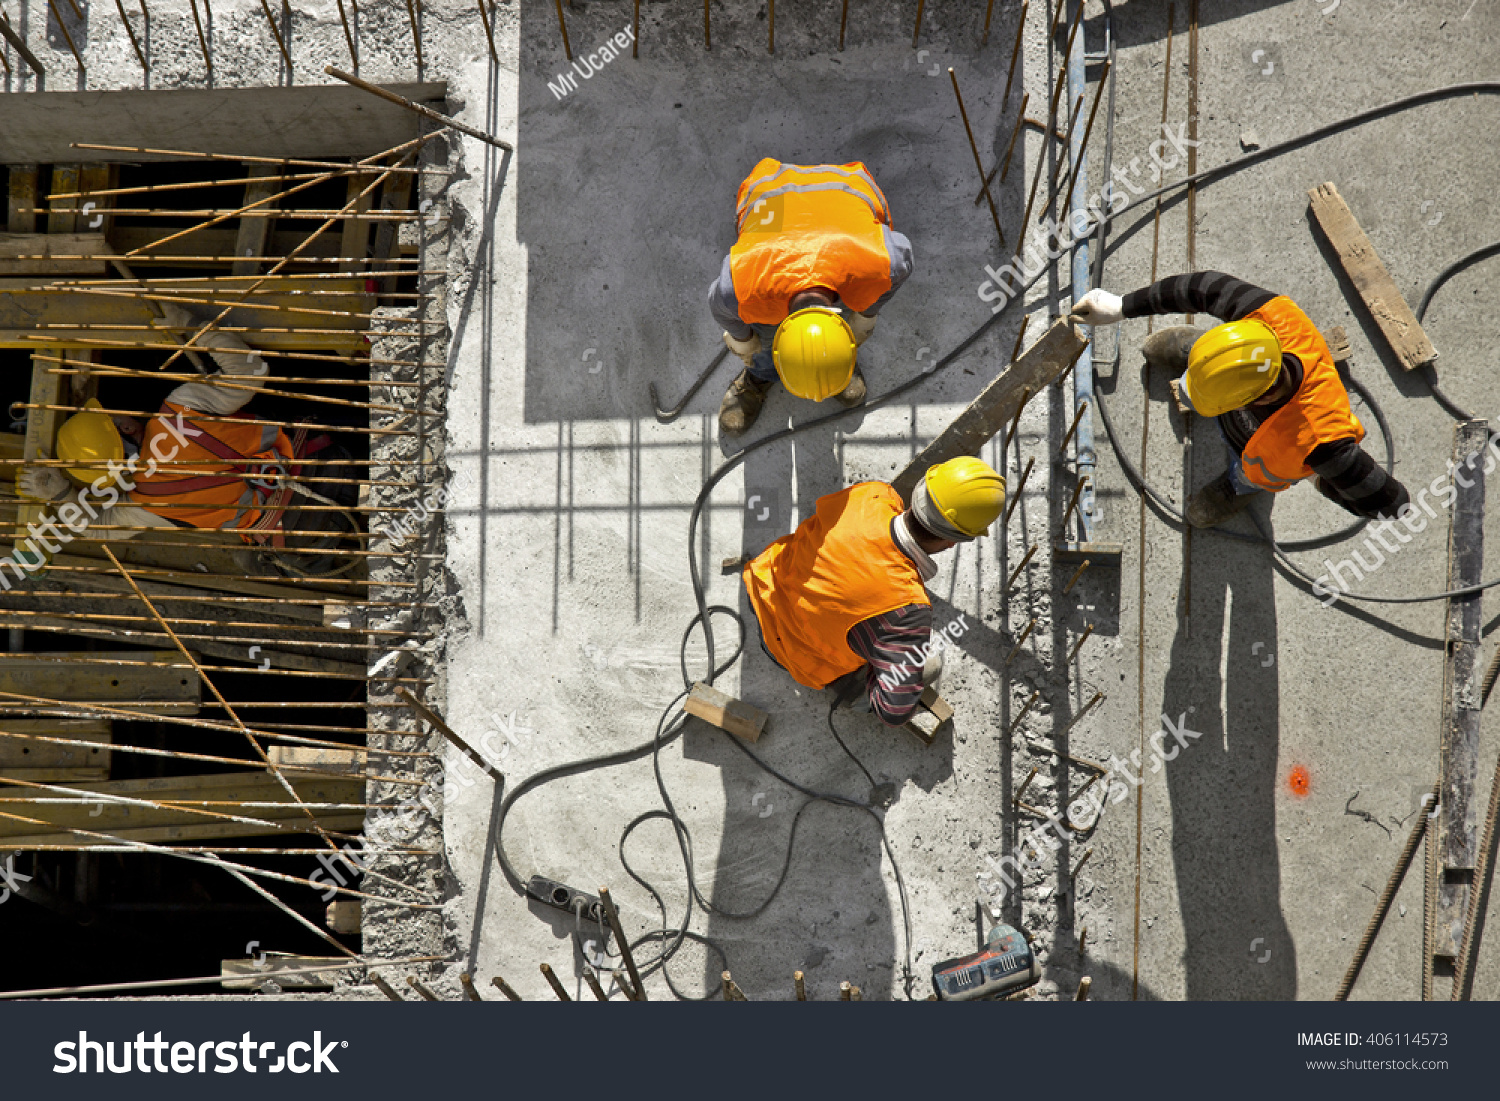 Construction site workers - aerial - Top View #406114573